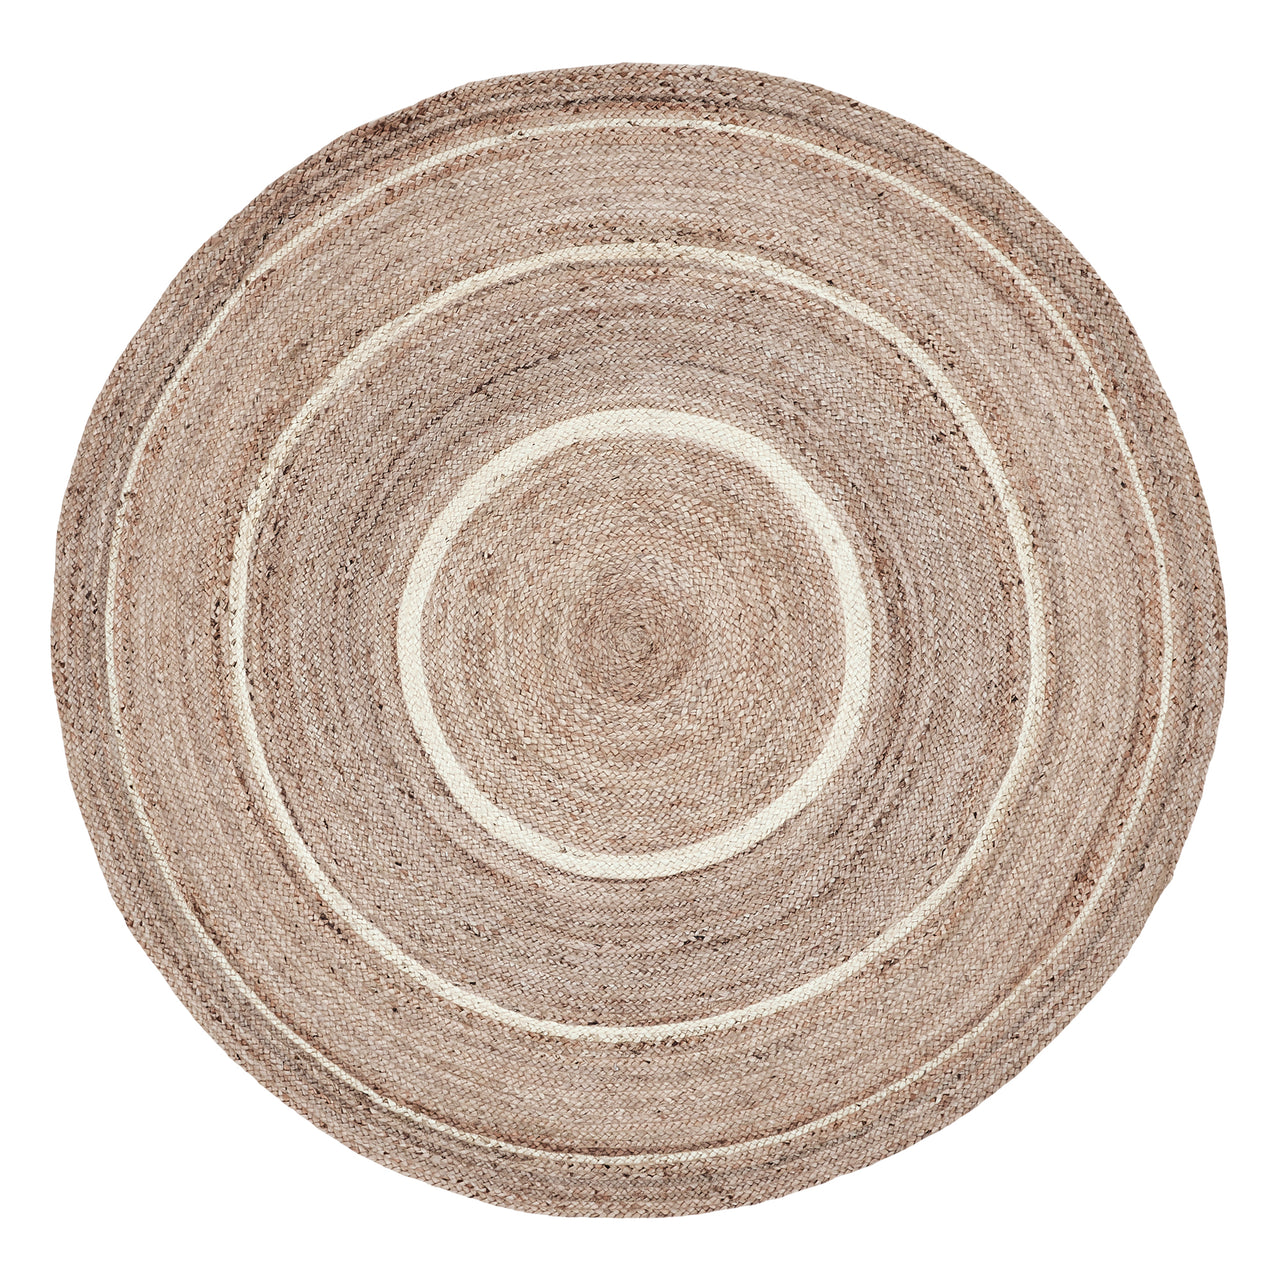 Natural & Creme Jute Round Braided Rugs with Rug Pads VHC Brands